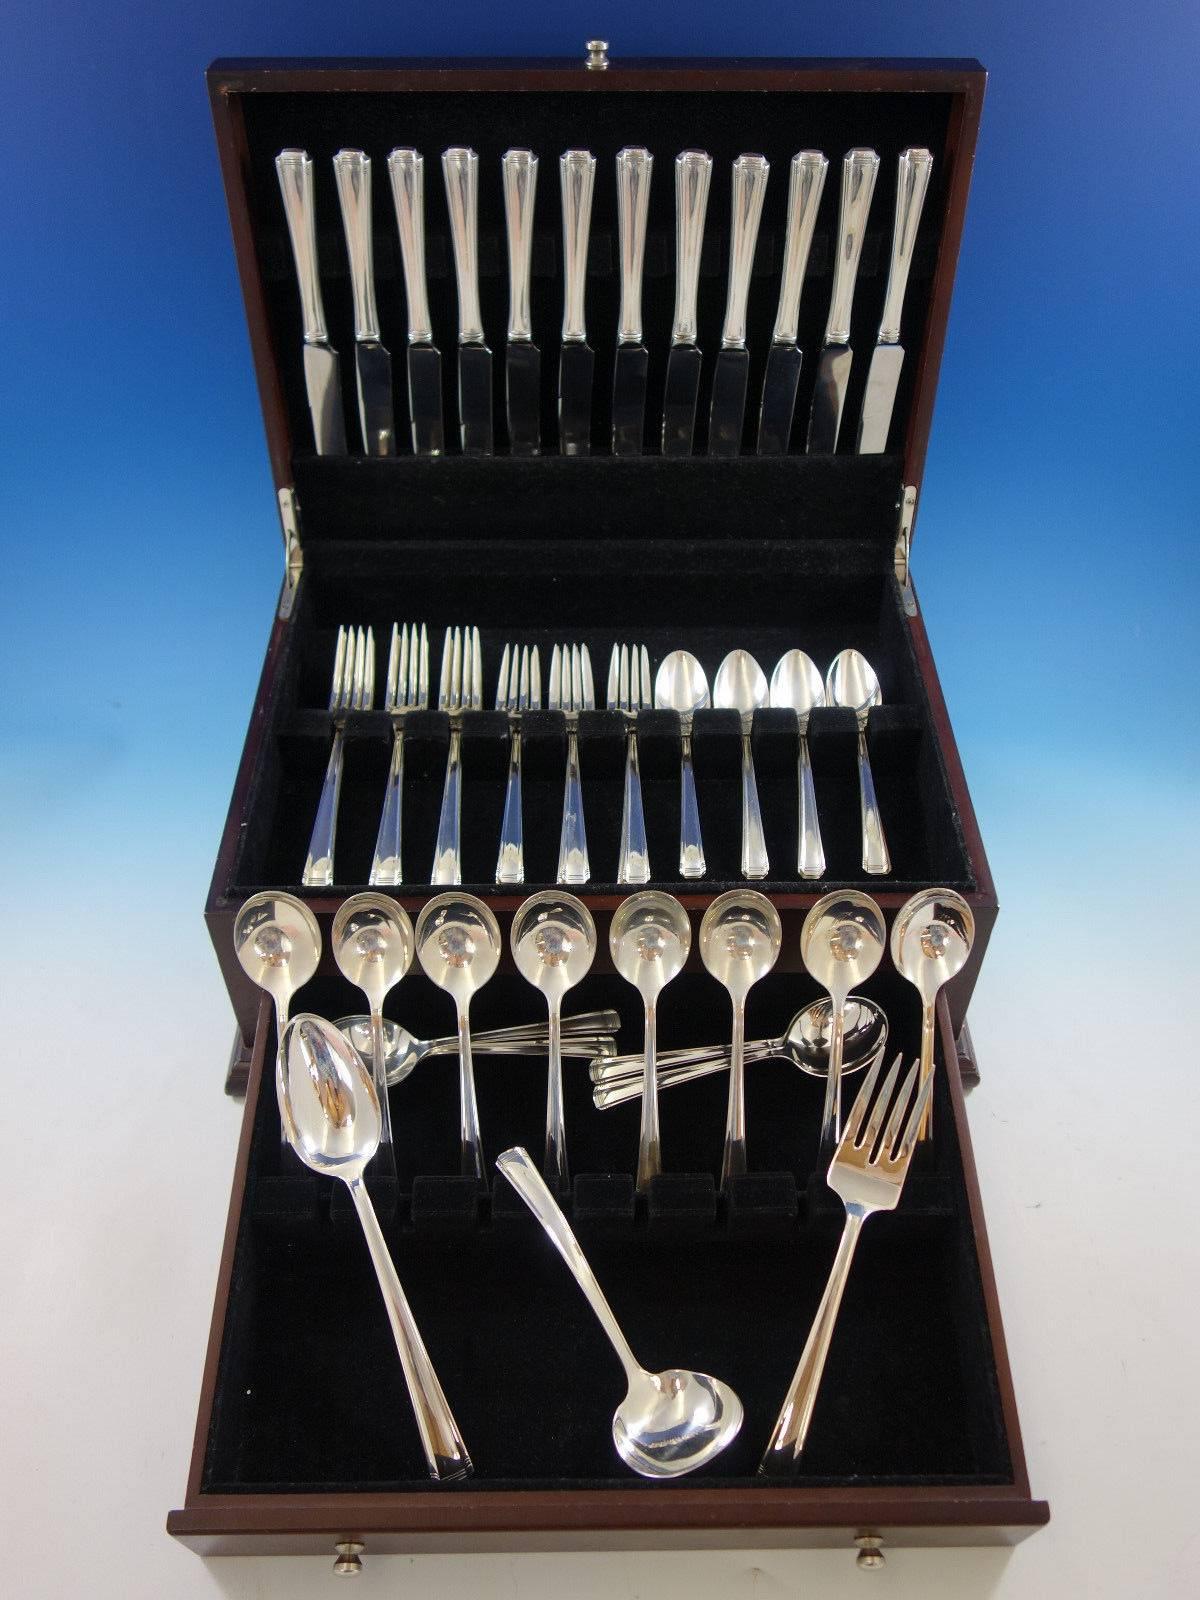 John and Priscilla by Westmorland sterling silver flatware set of 63 pieces. This set includes: 

12 knives, 9